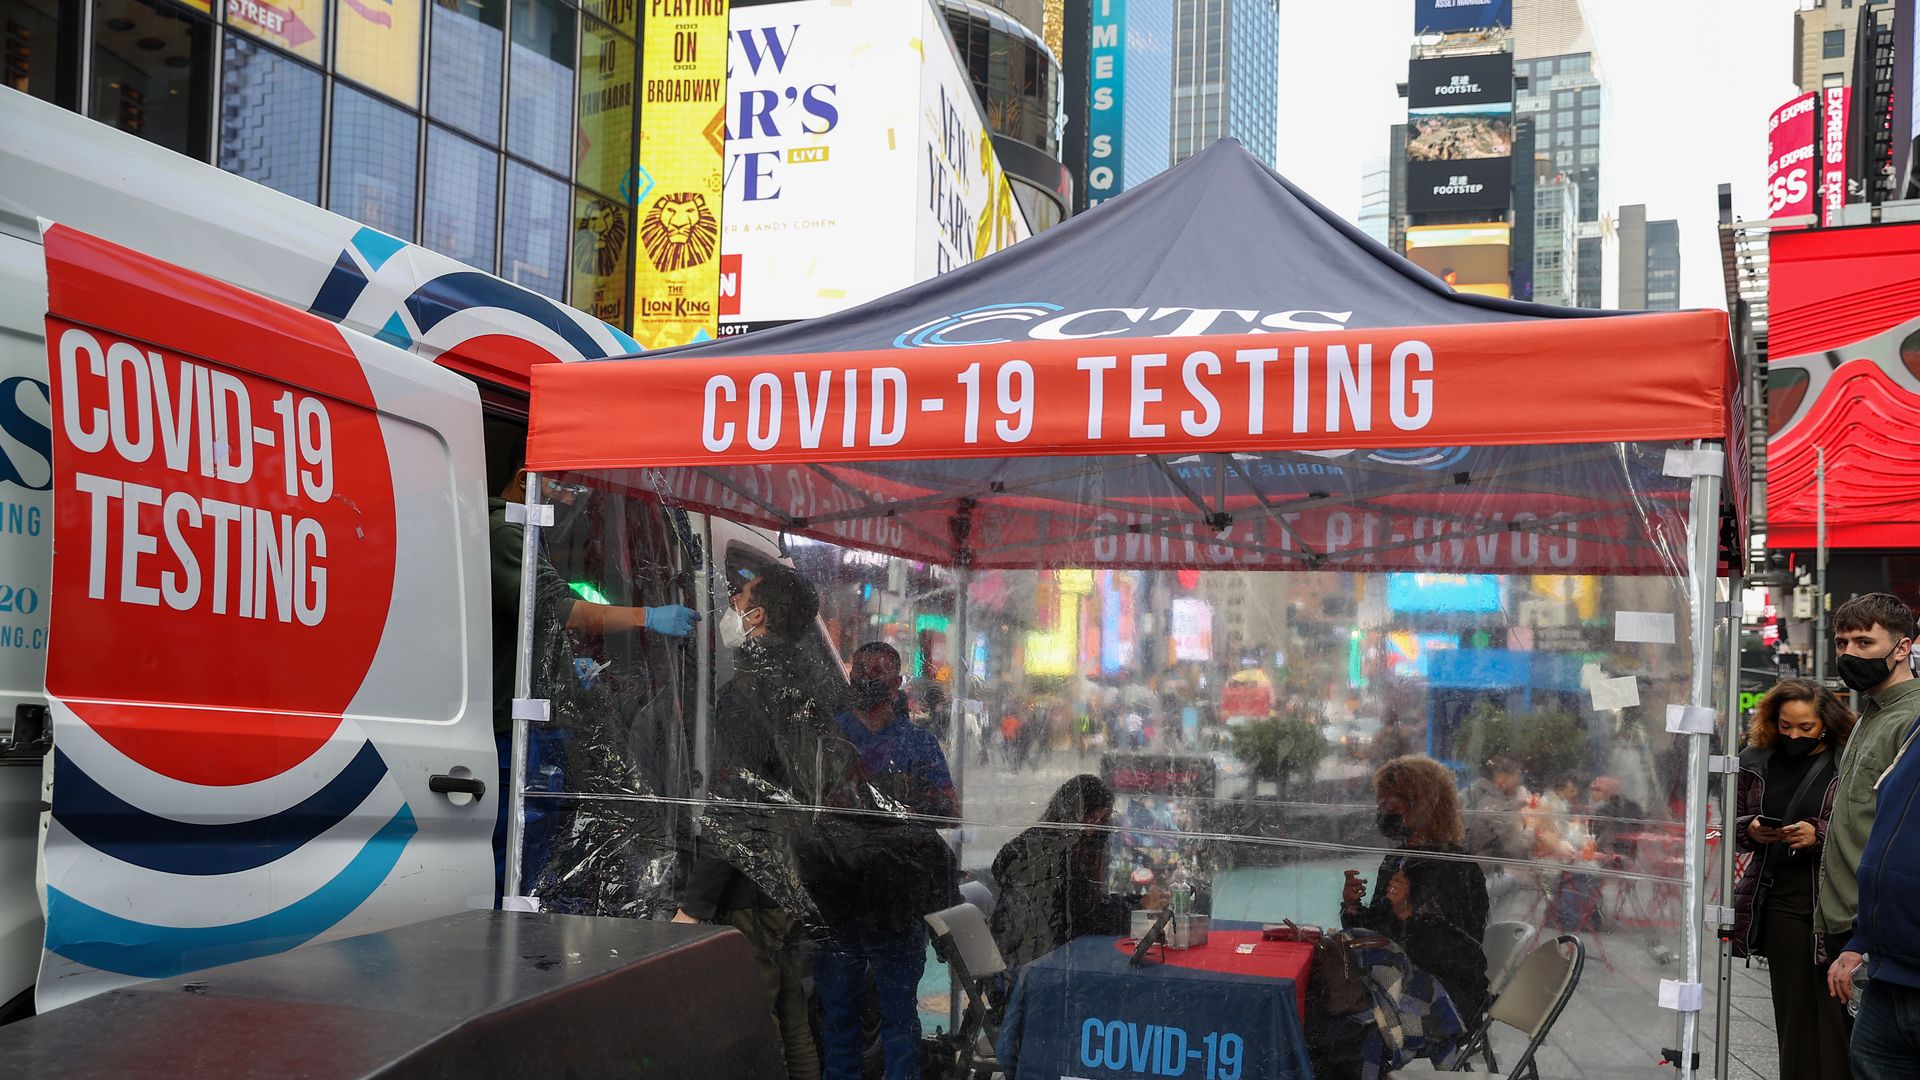 Covid-19 mobile testing site as people lined up at the Times Square in New York City, United States on Dec 6, 2021.